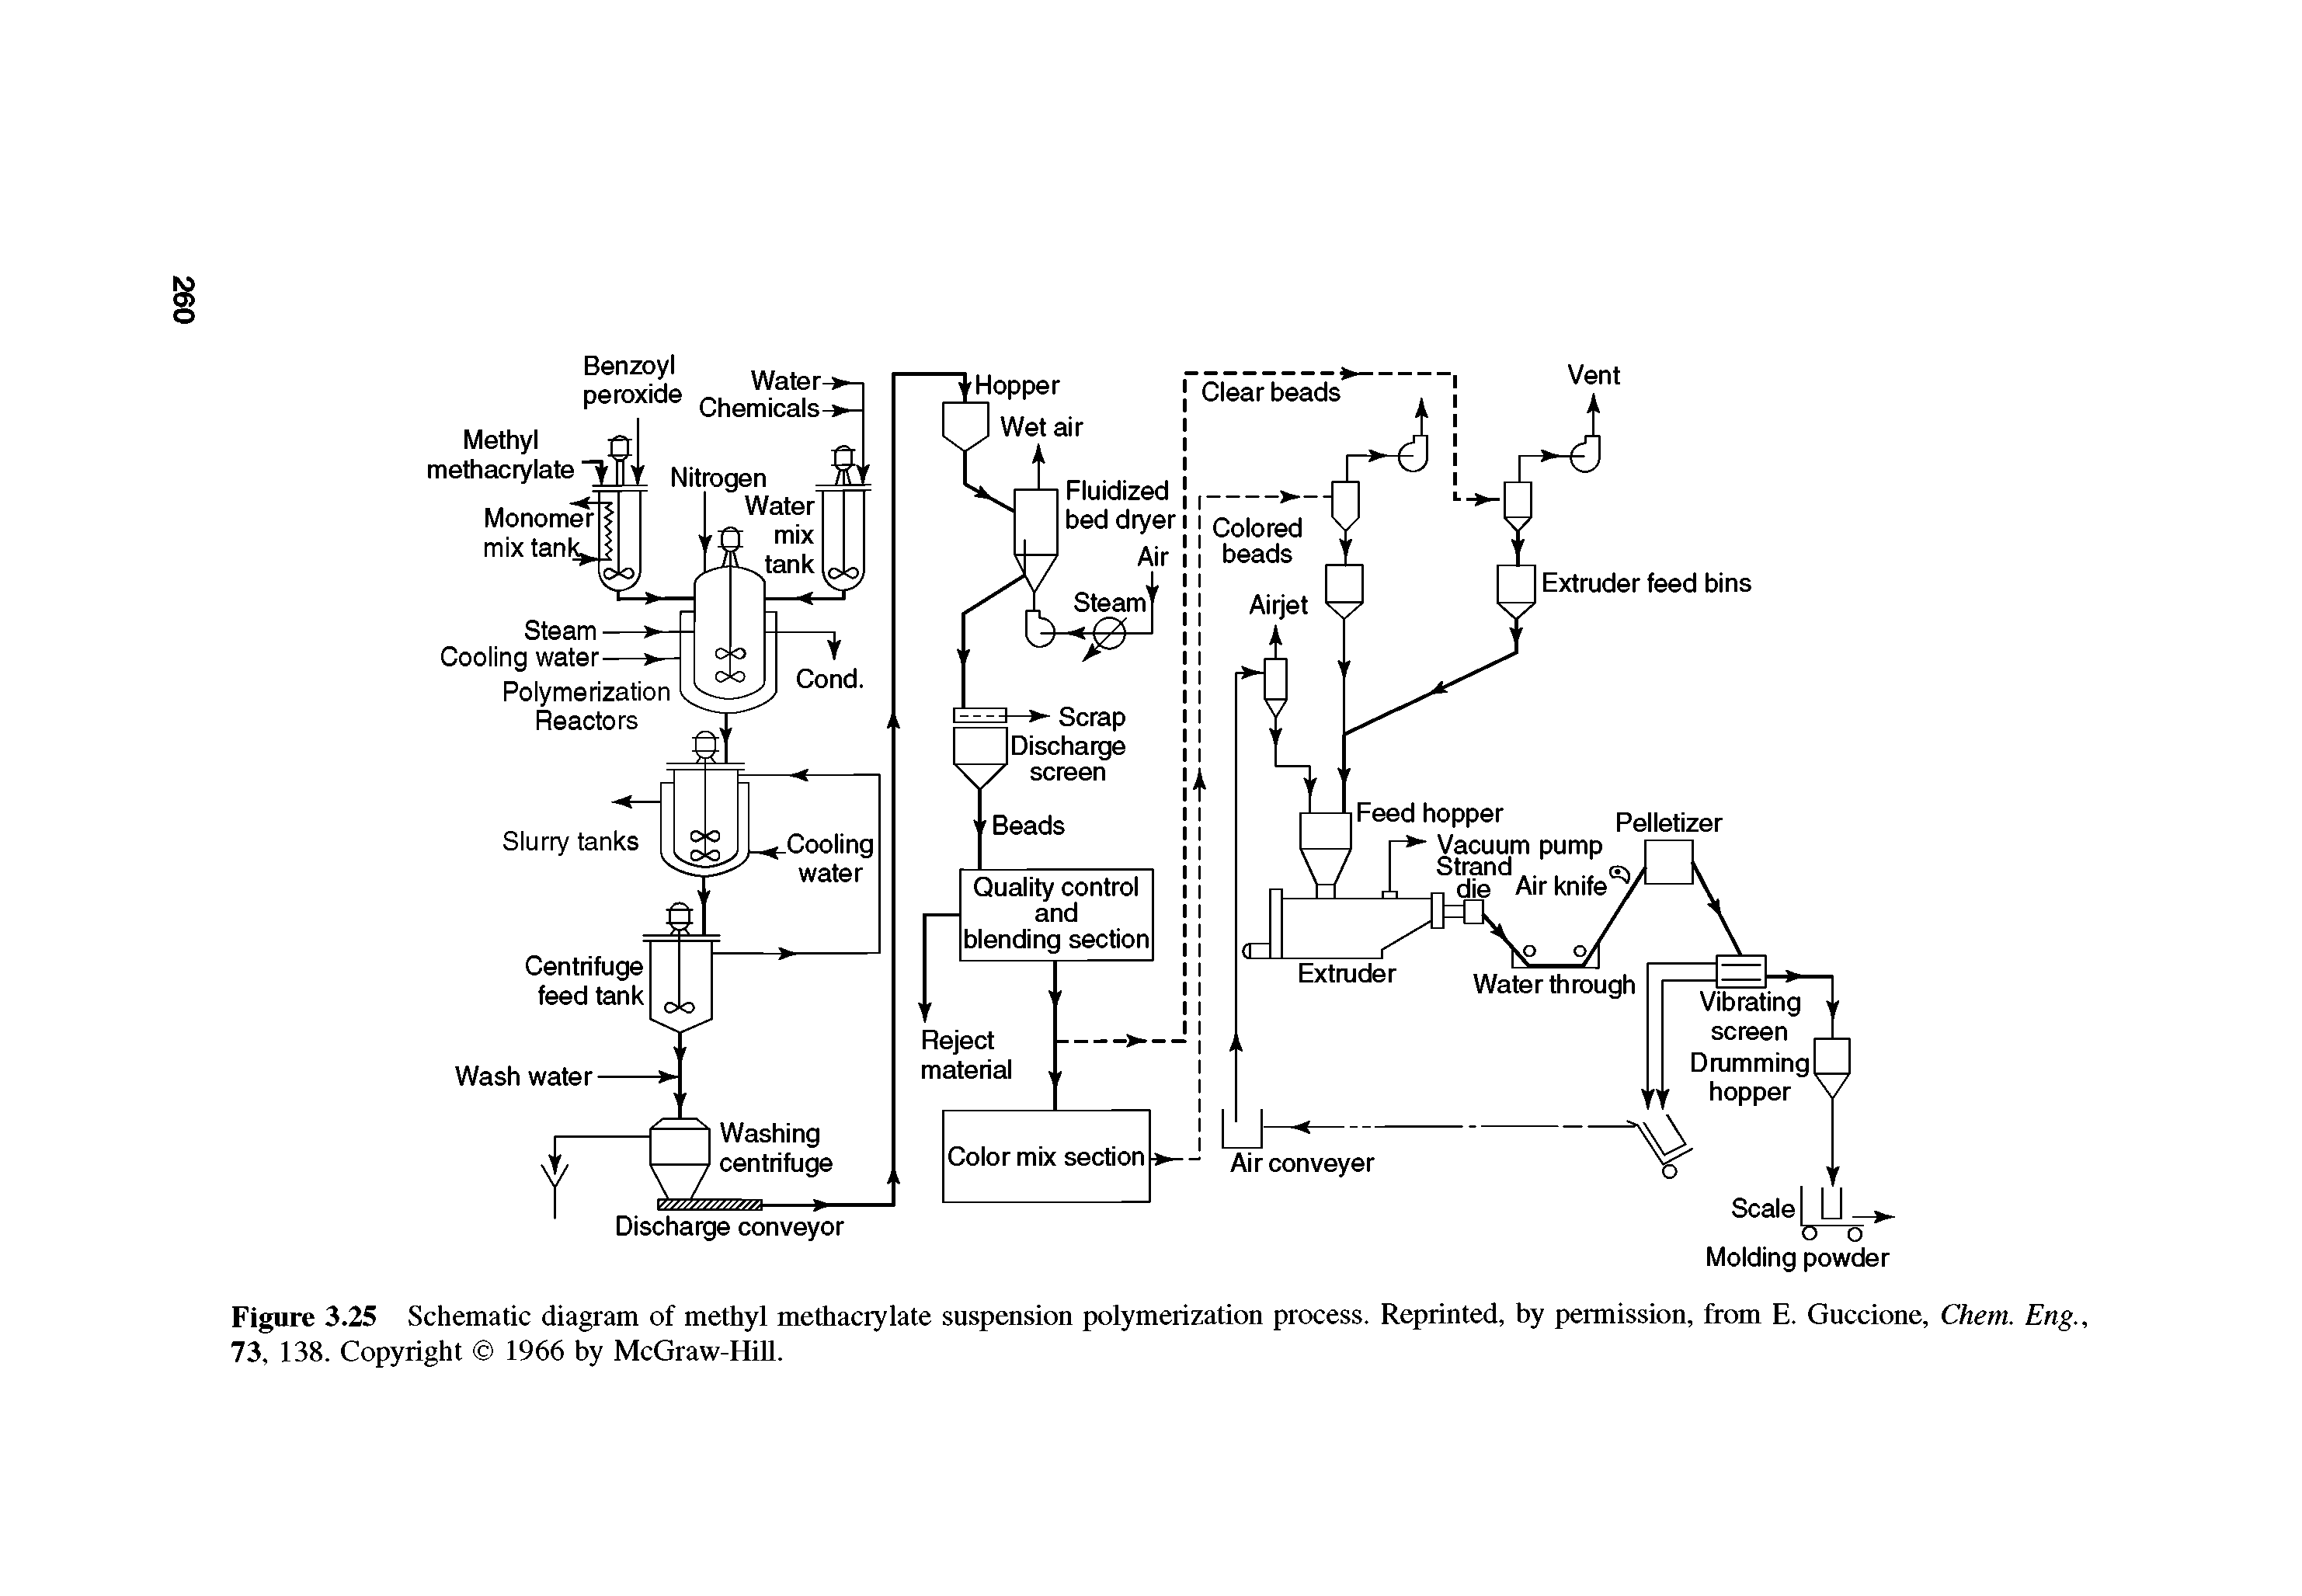 Figure 3.25 Schematic diagram of methyl methacrylate suspension polymerization process. Reprinted, by permission, from E. Guccione, Chem. Eng., 73, 138. Copyright 1966 by McGraw-HiU.